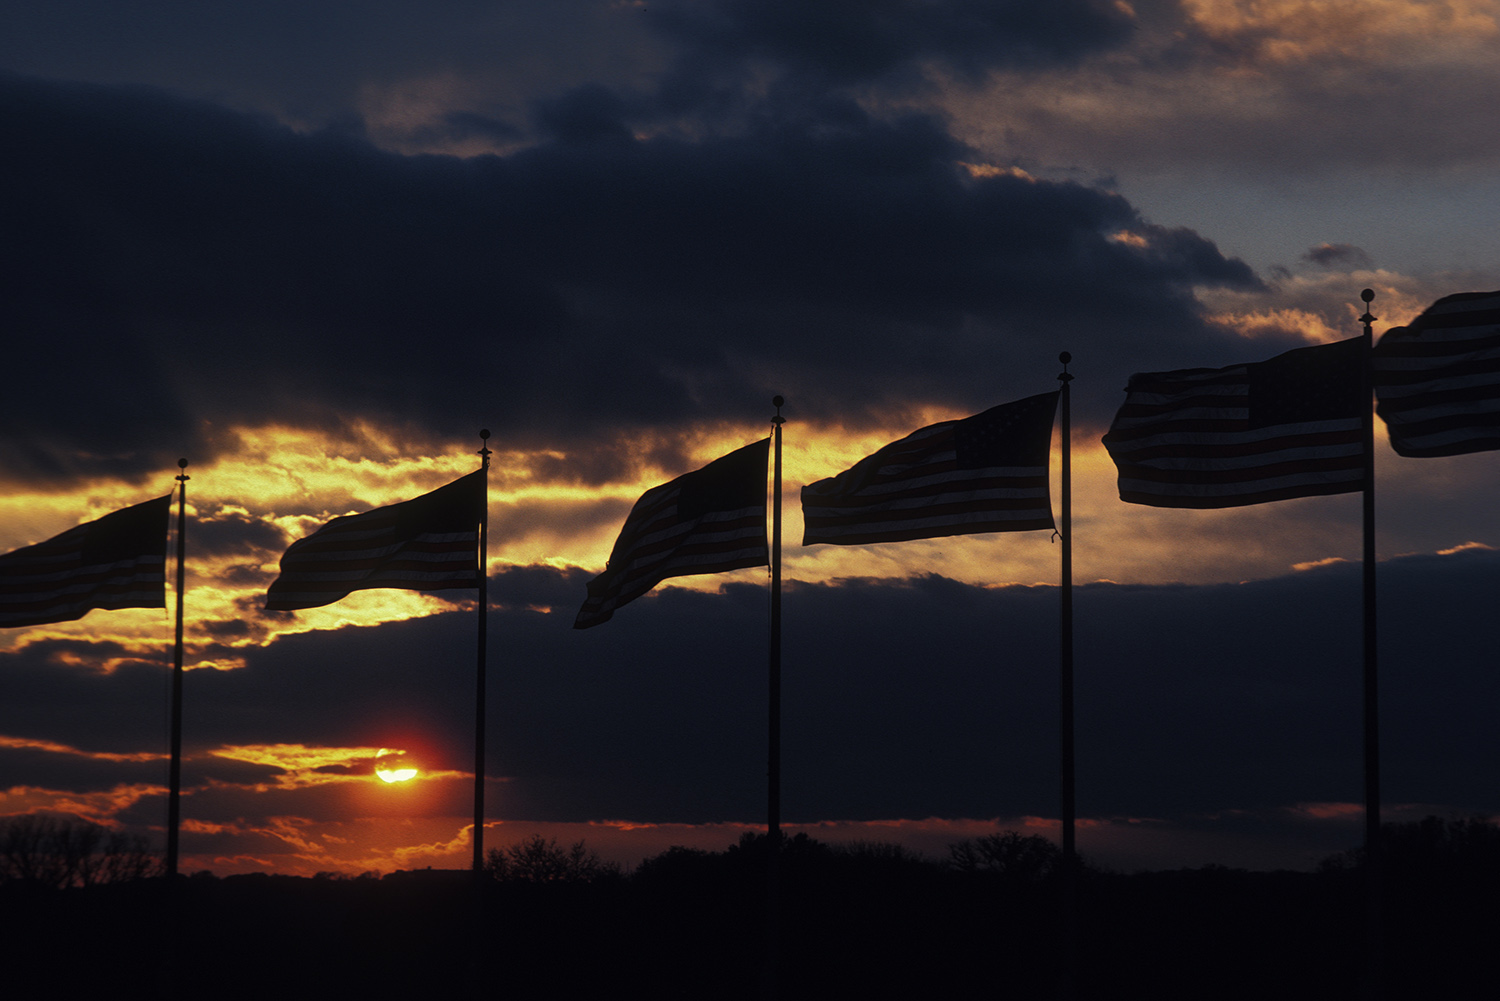 United_States_Flags_Washington_Monument_Grounds_Sunset_Clouds_Patriotic.jpg